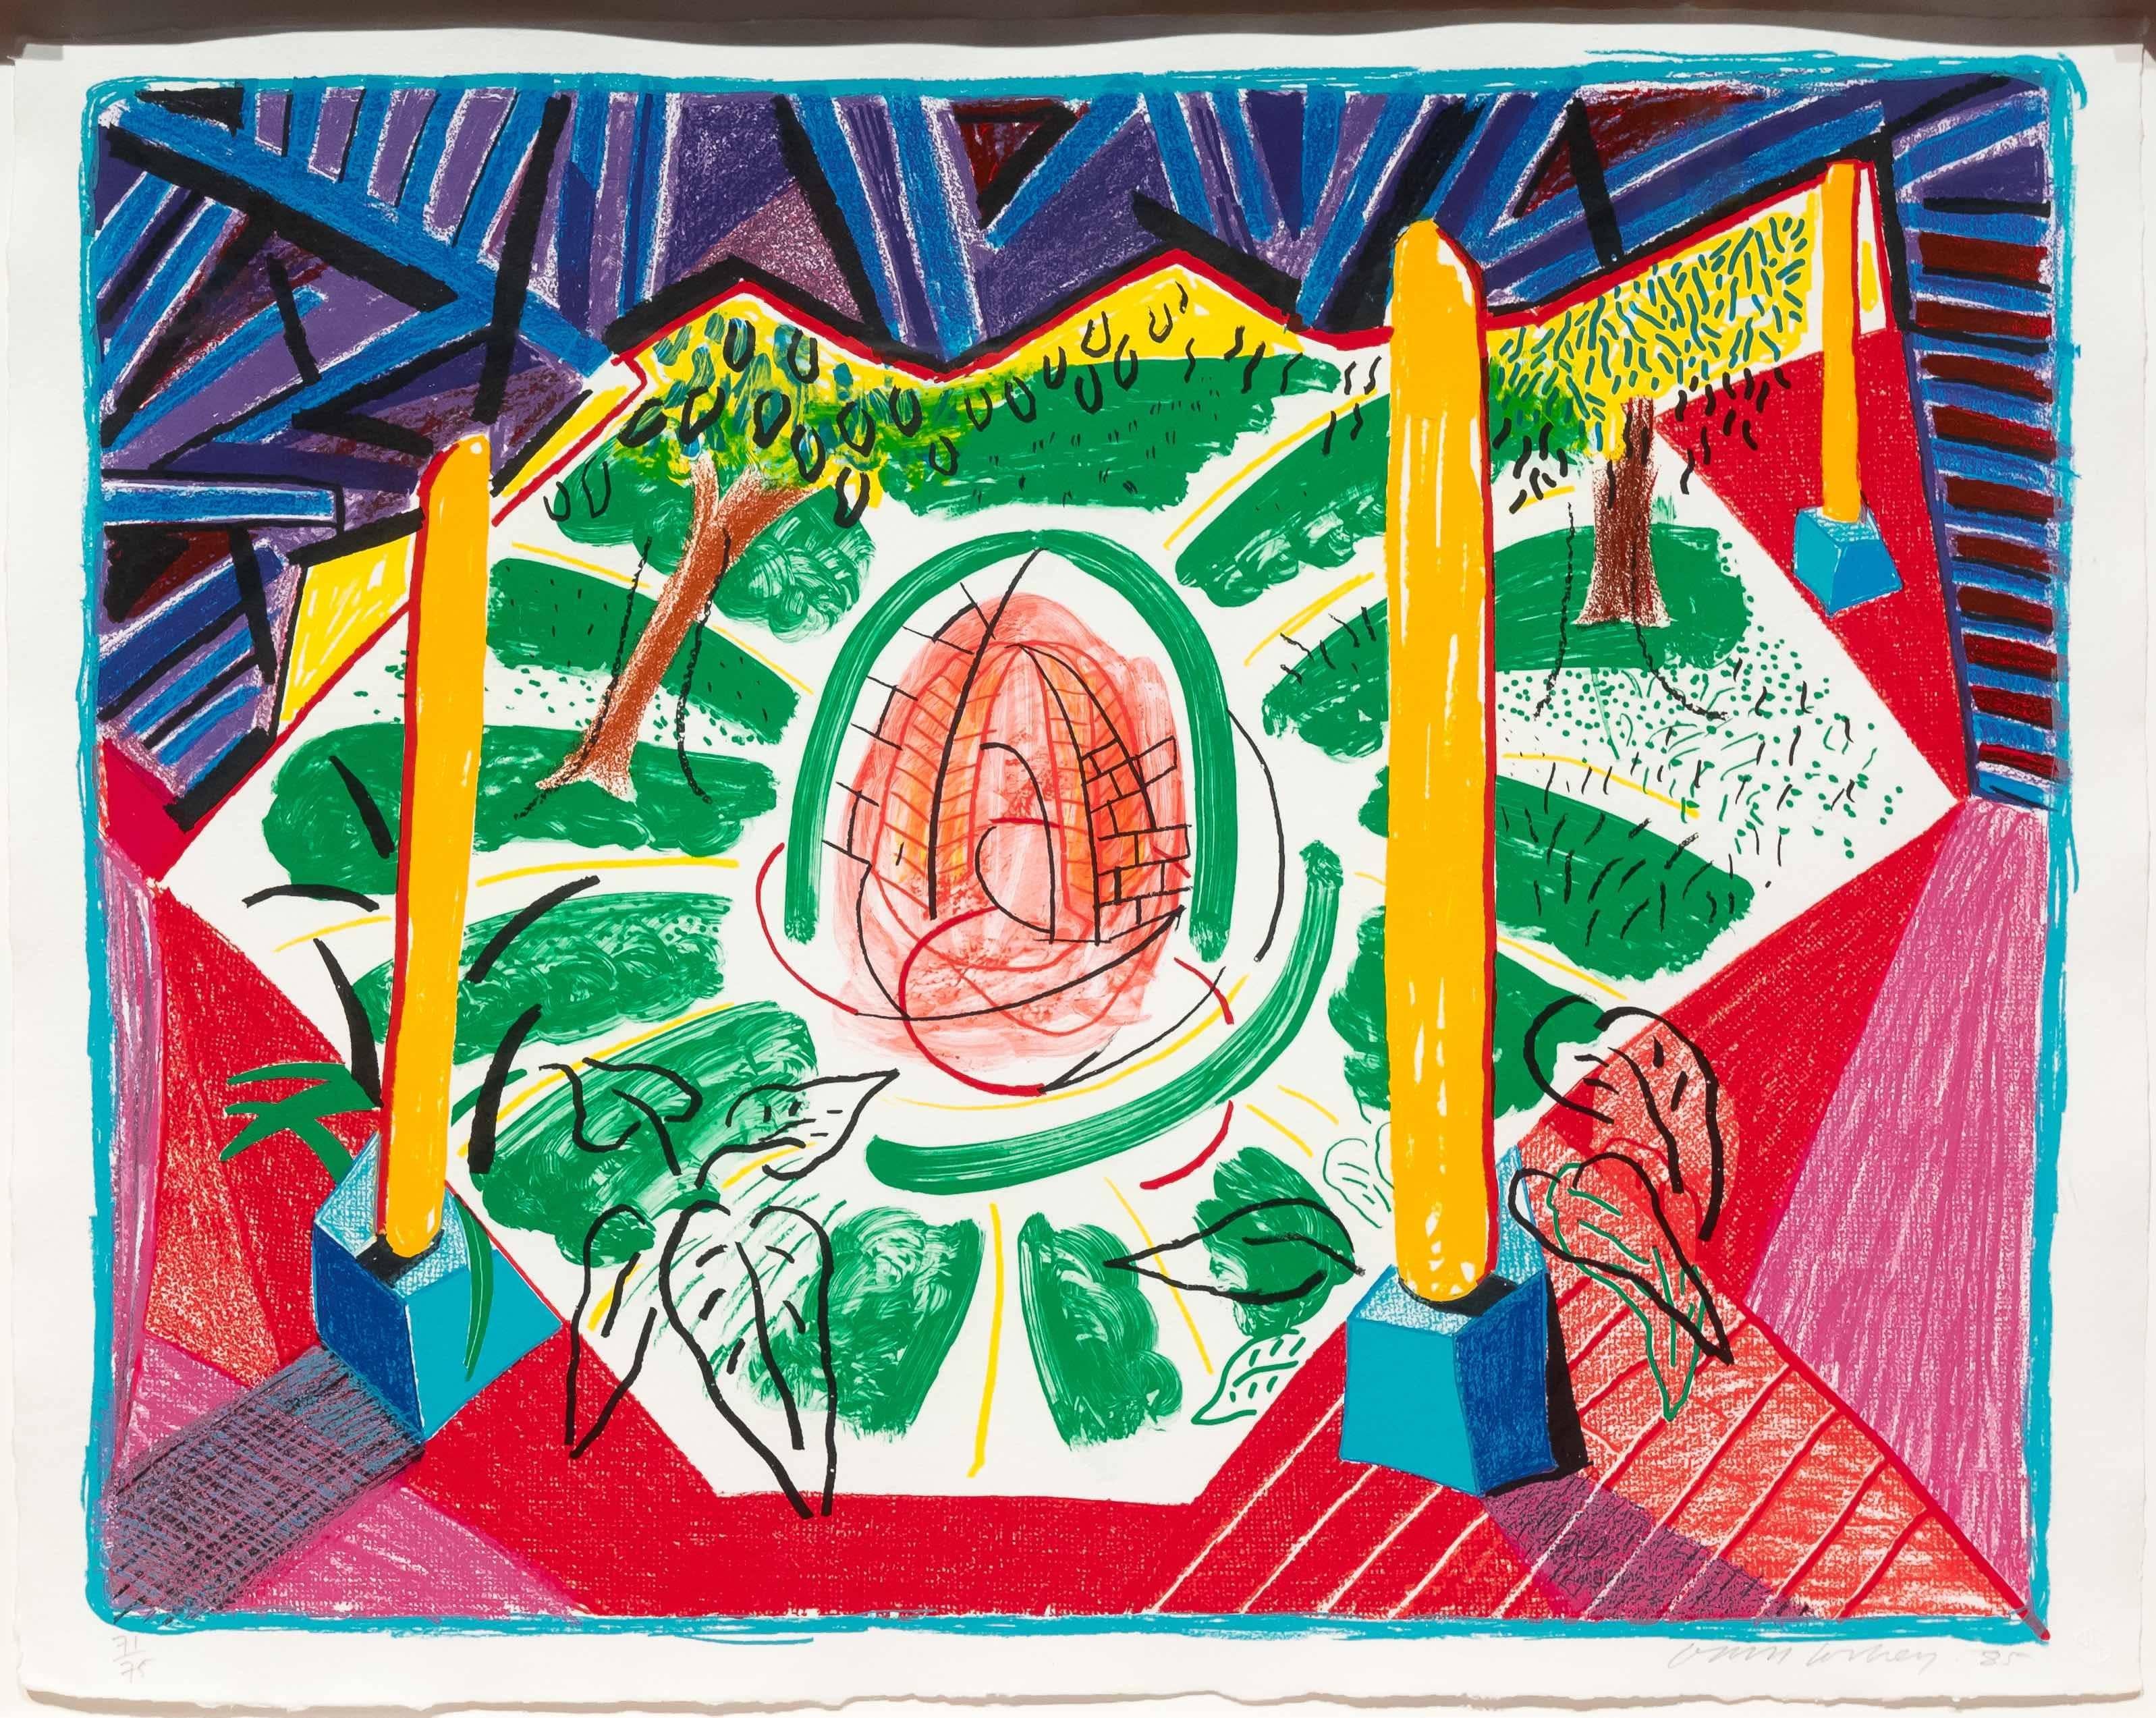 Views of Hotel Well II, from Moving Focus - Print by David Hockney